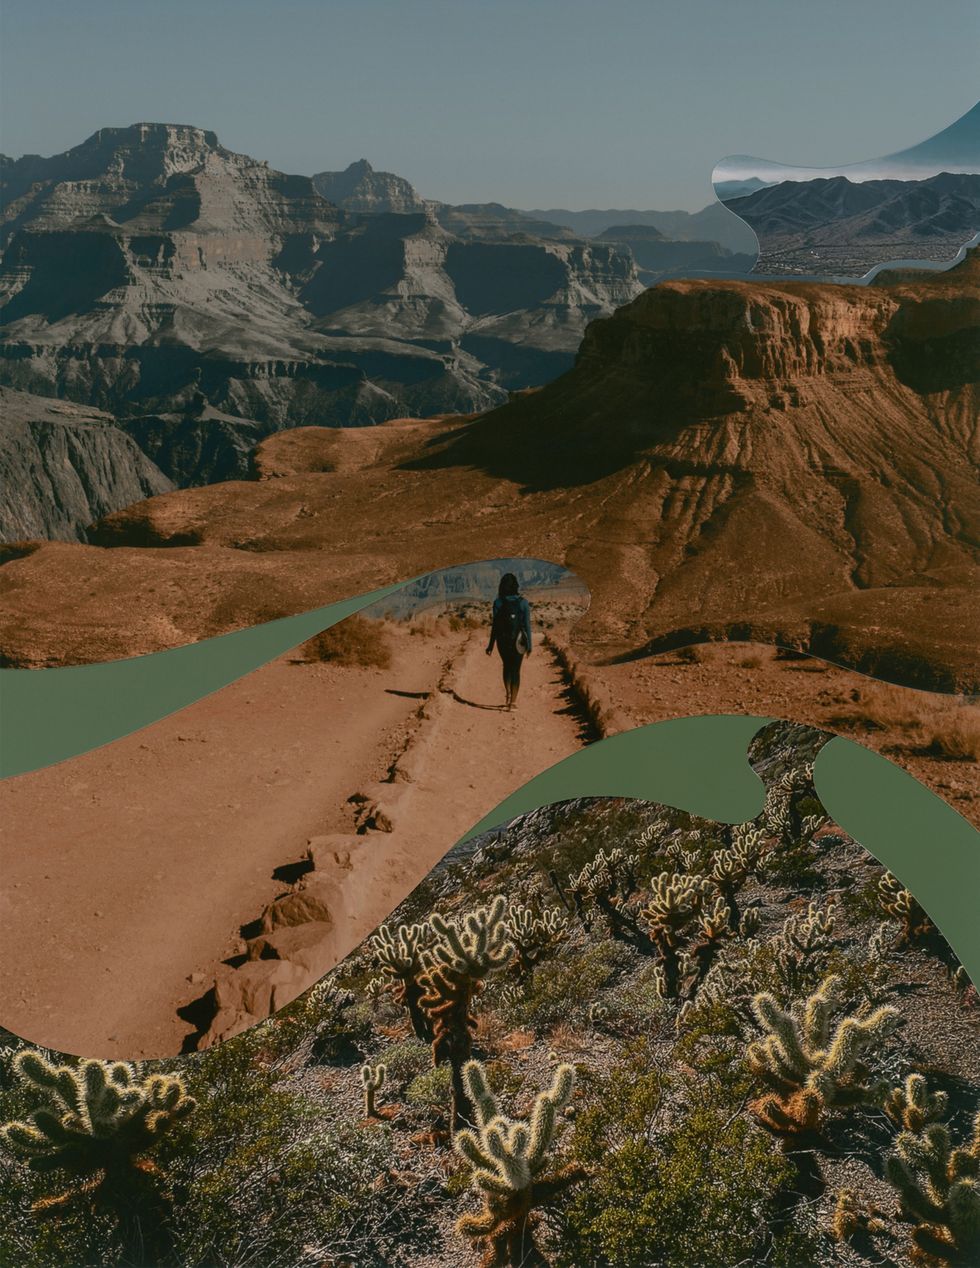 collage of a dessert area, similar to grand canyons, with person walking